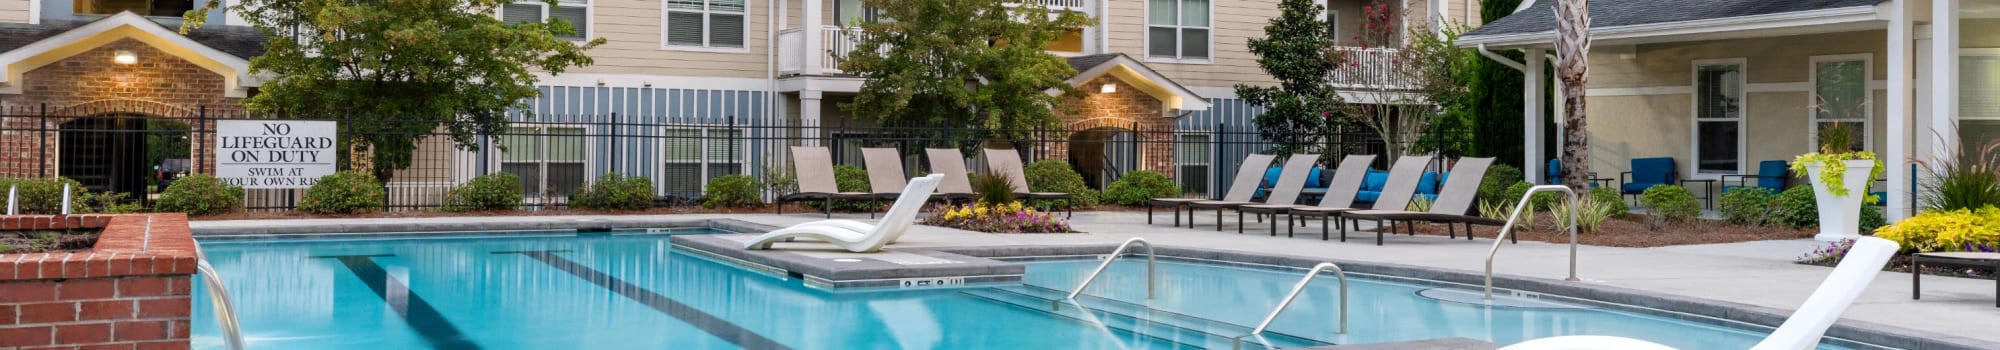 Amenities at Ansley Commons Apartment Homes in Ladson, South Carolina